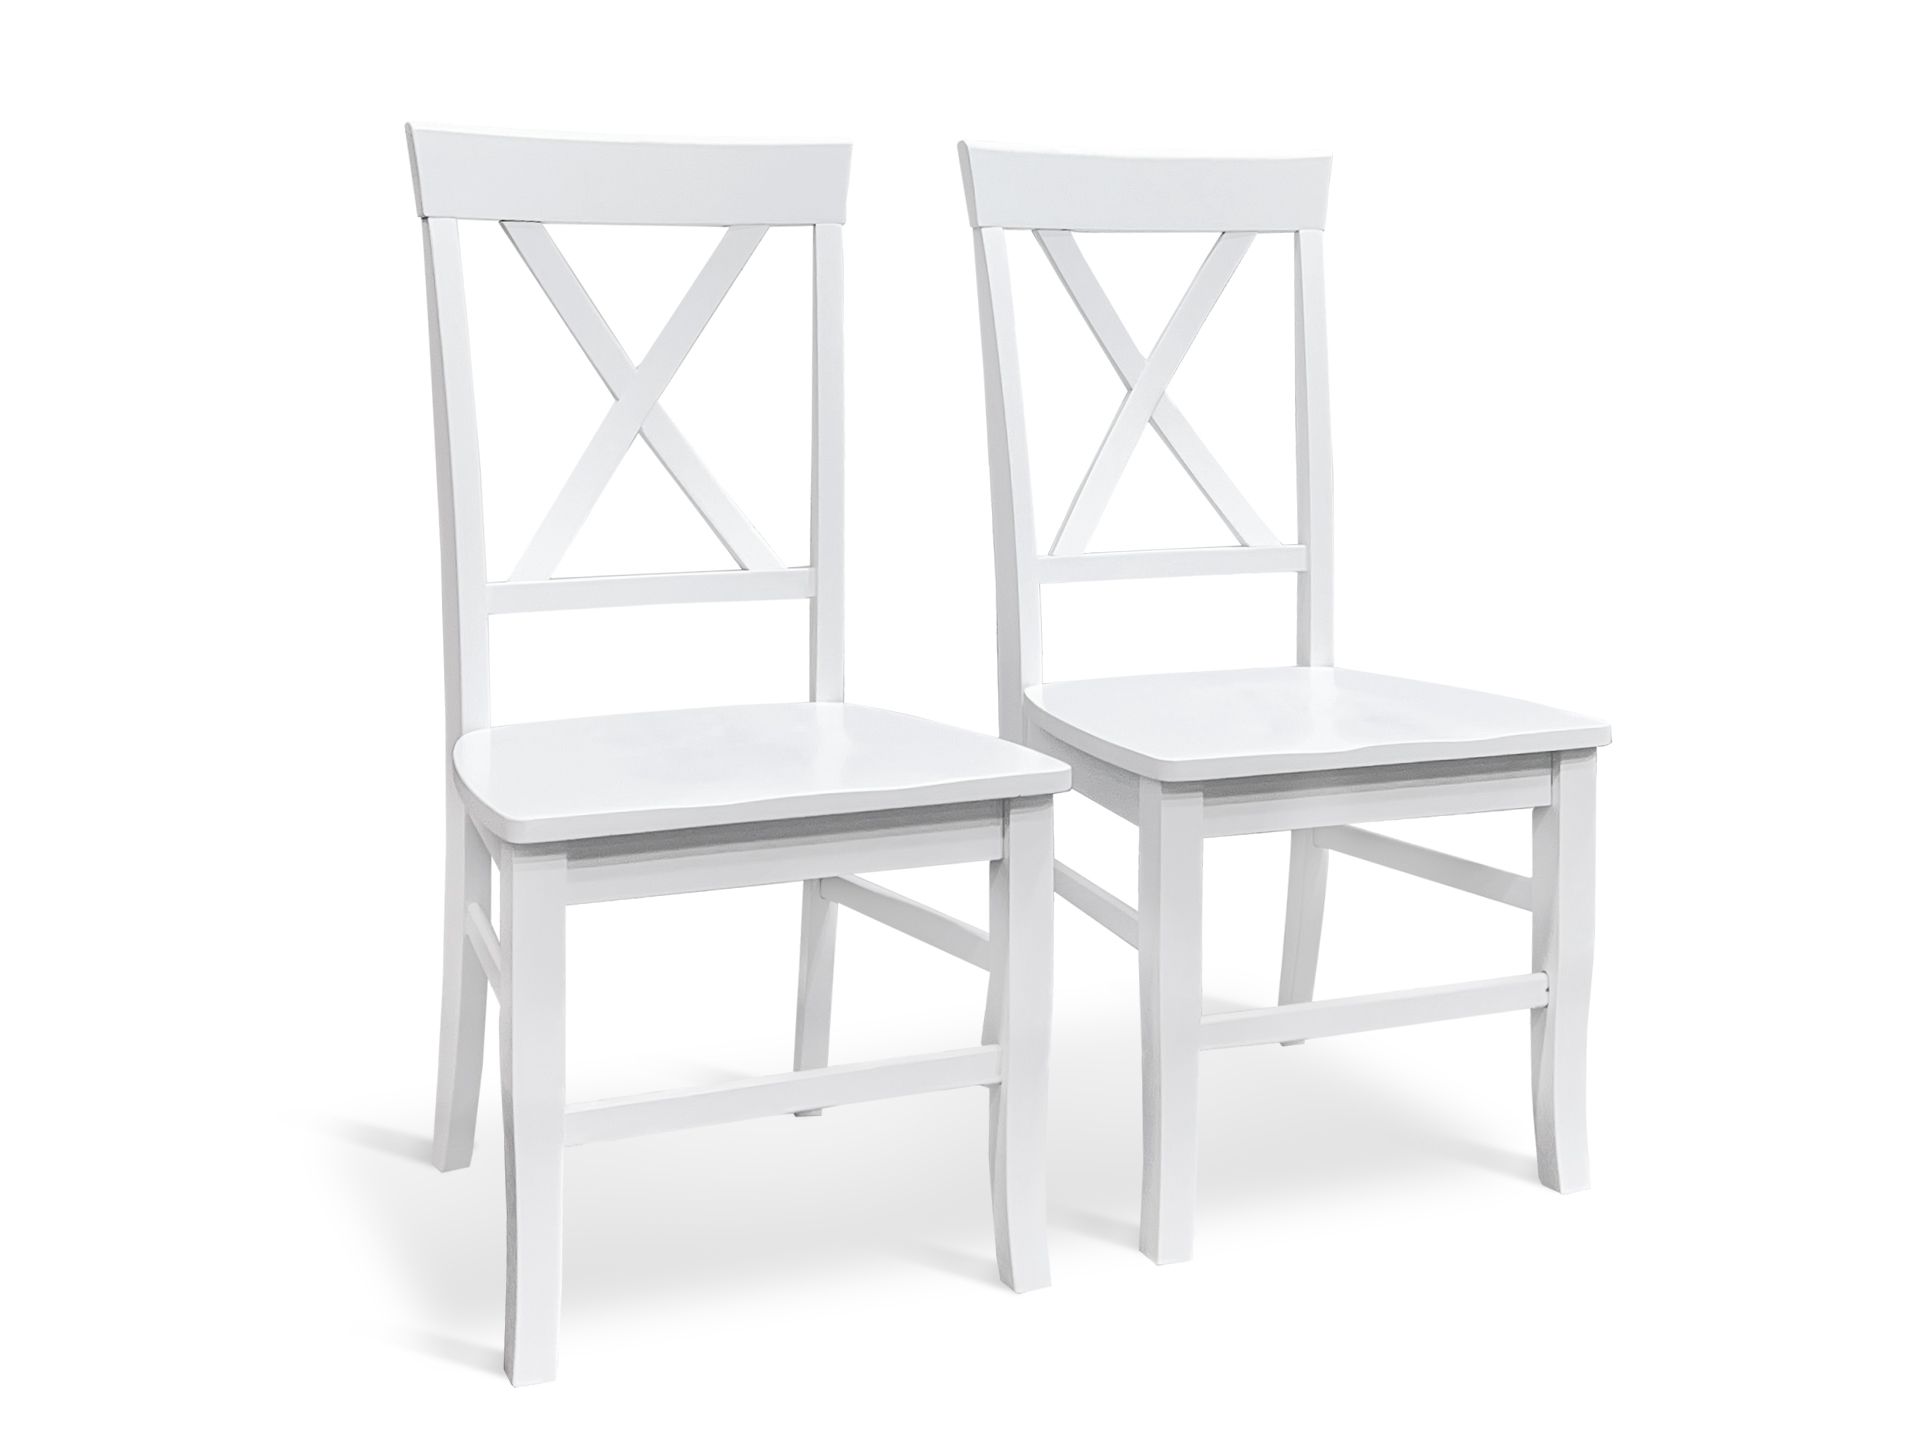 Bali 5 Piece Dining Set with 6 Seater Dining Table - White